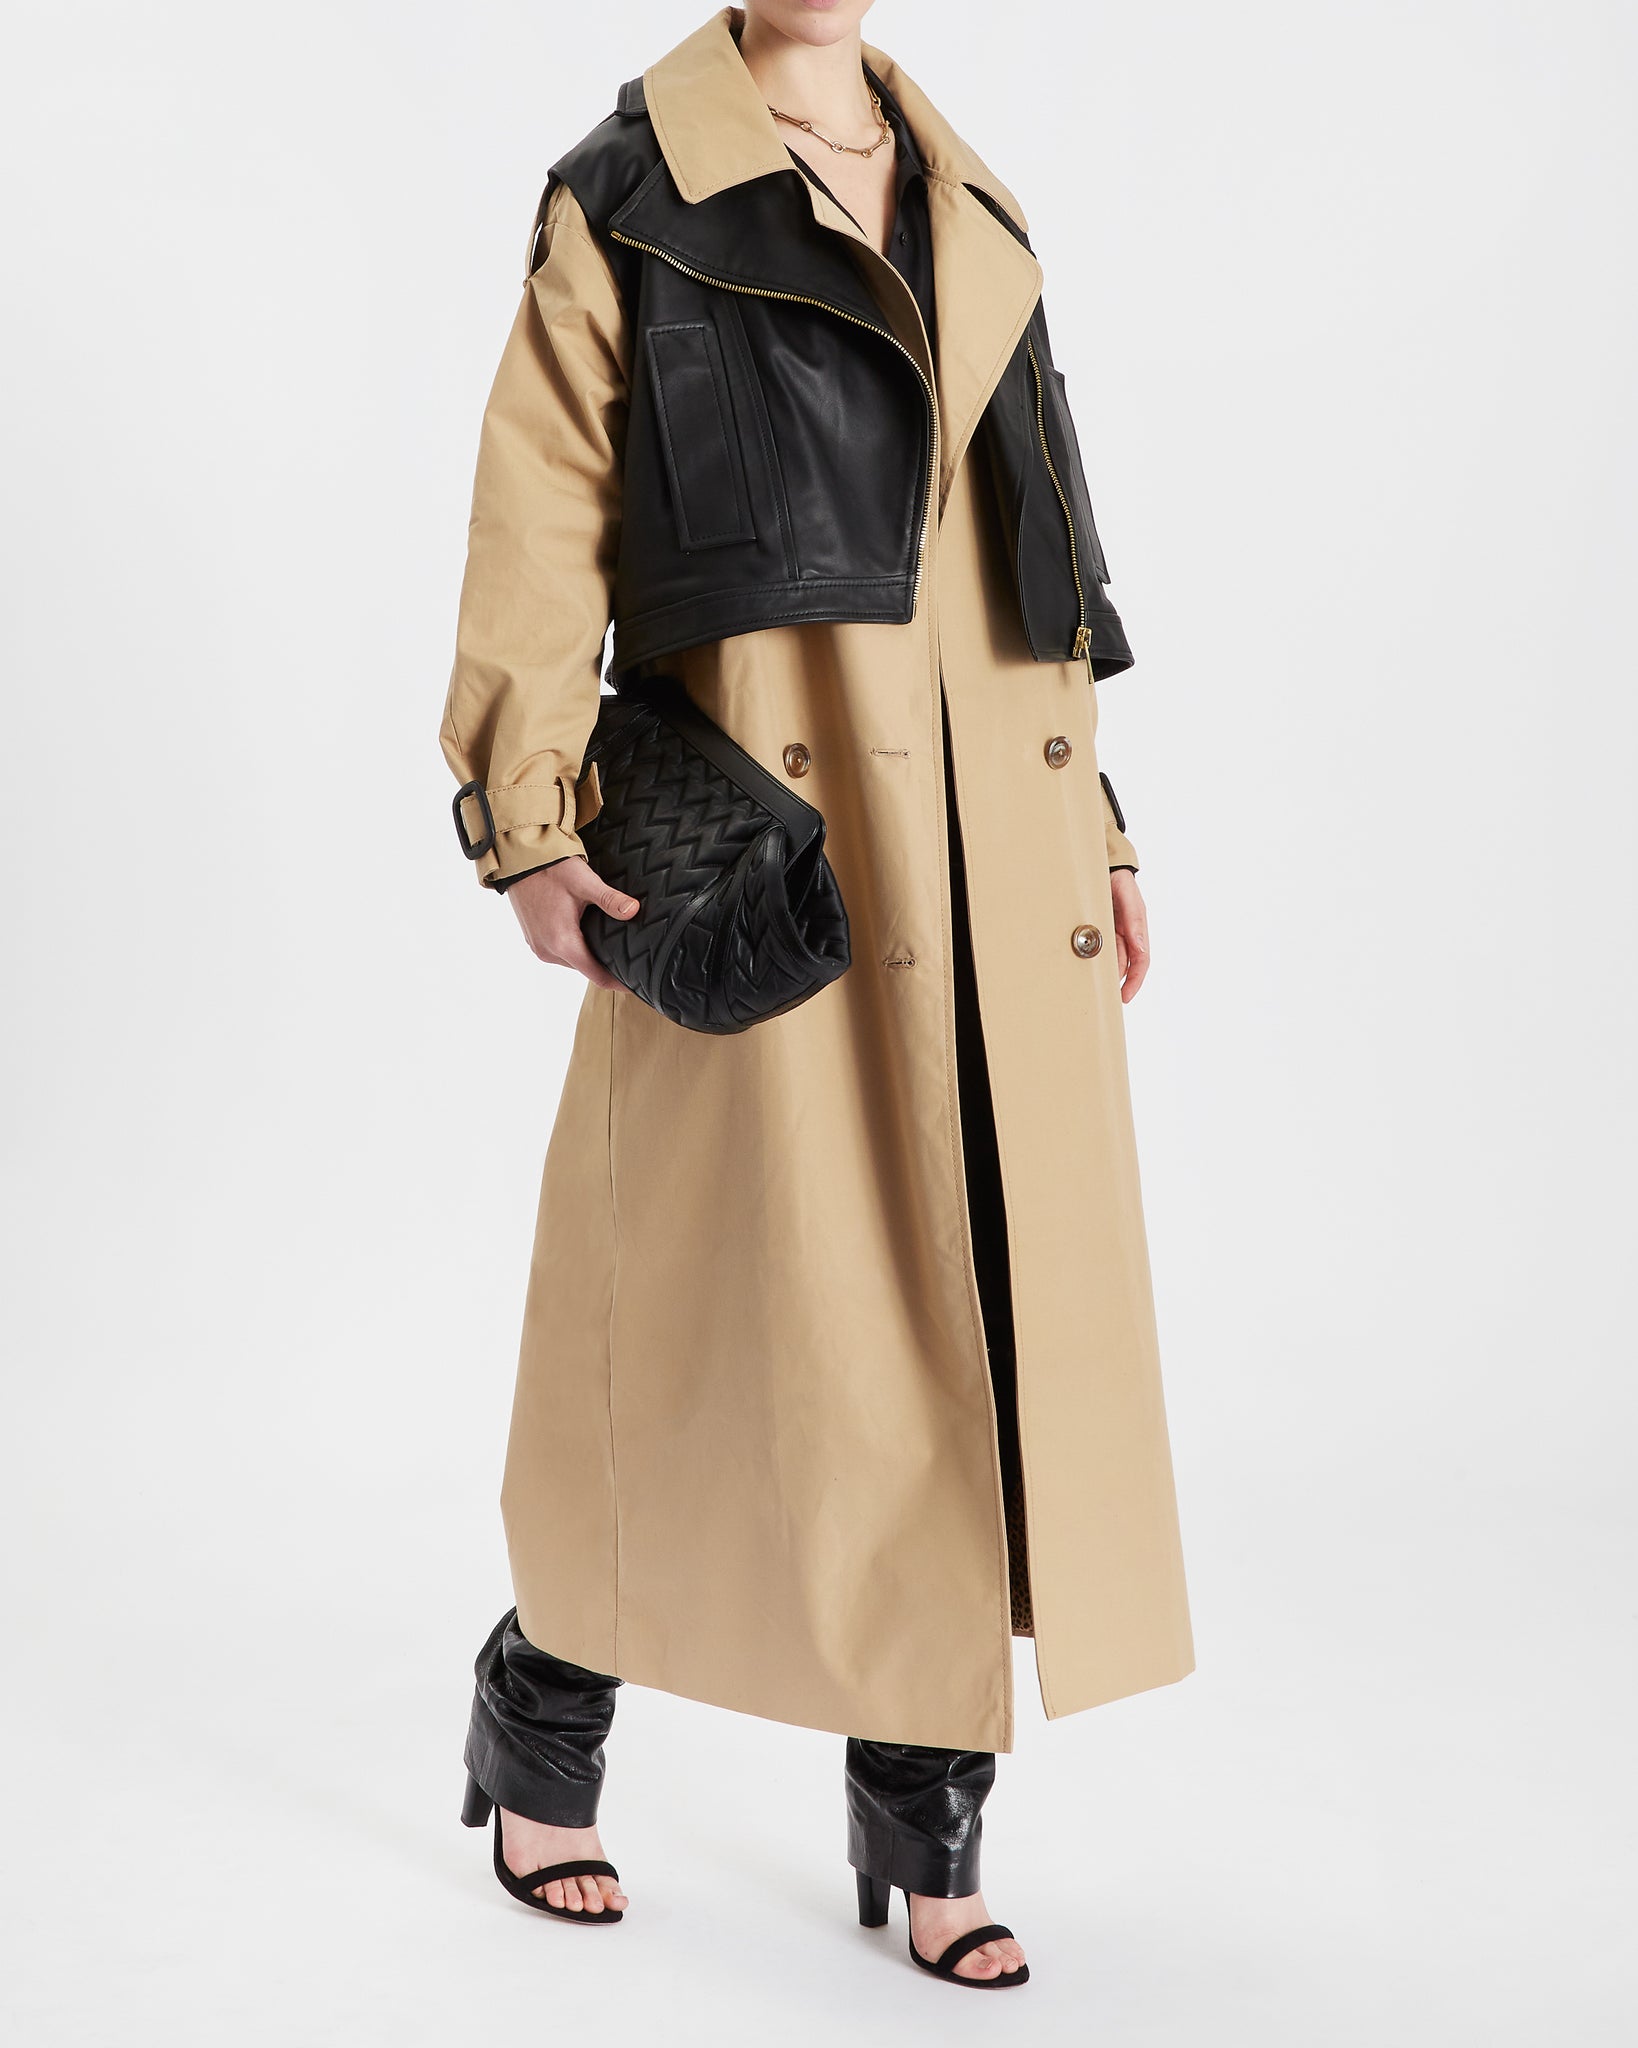 Dominique TRENCH WITH REMOVABLE BIKER JACKET - BLACK/BEIGE